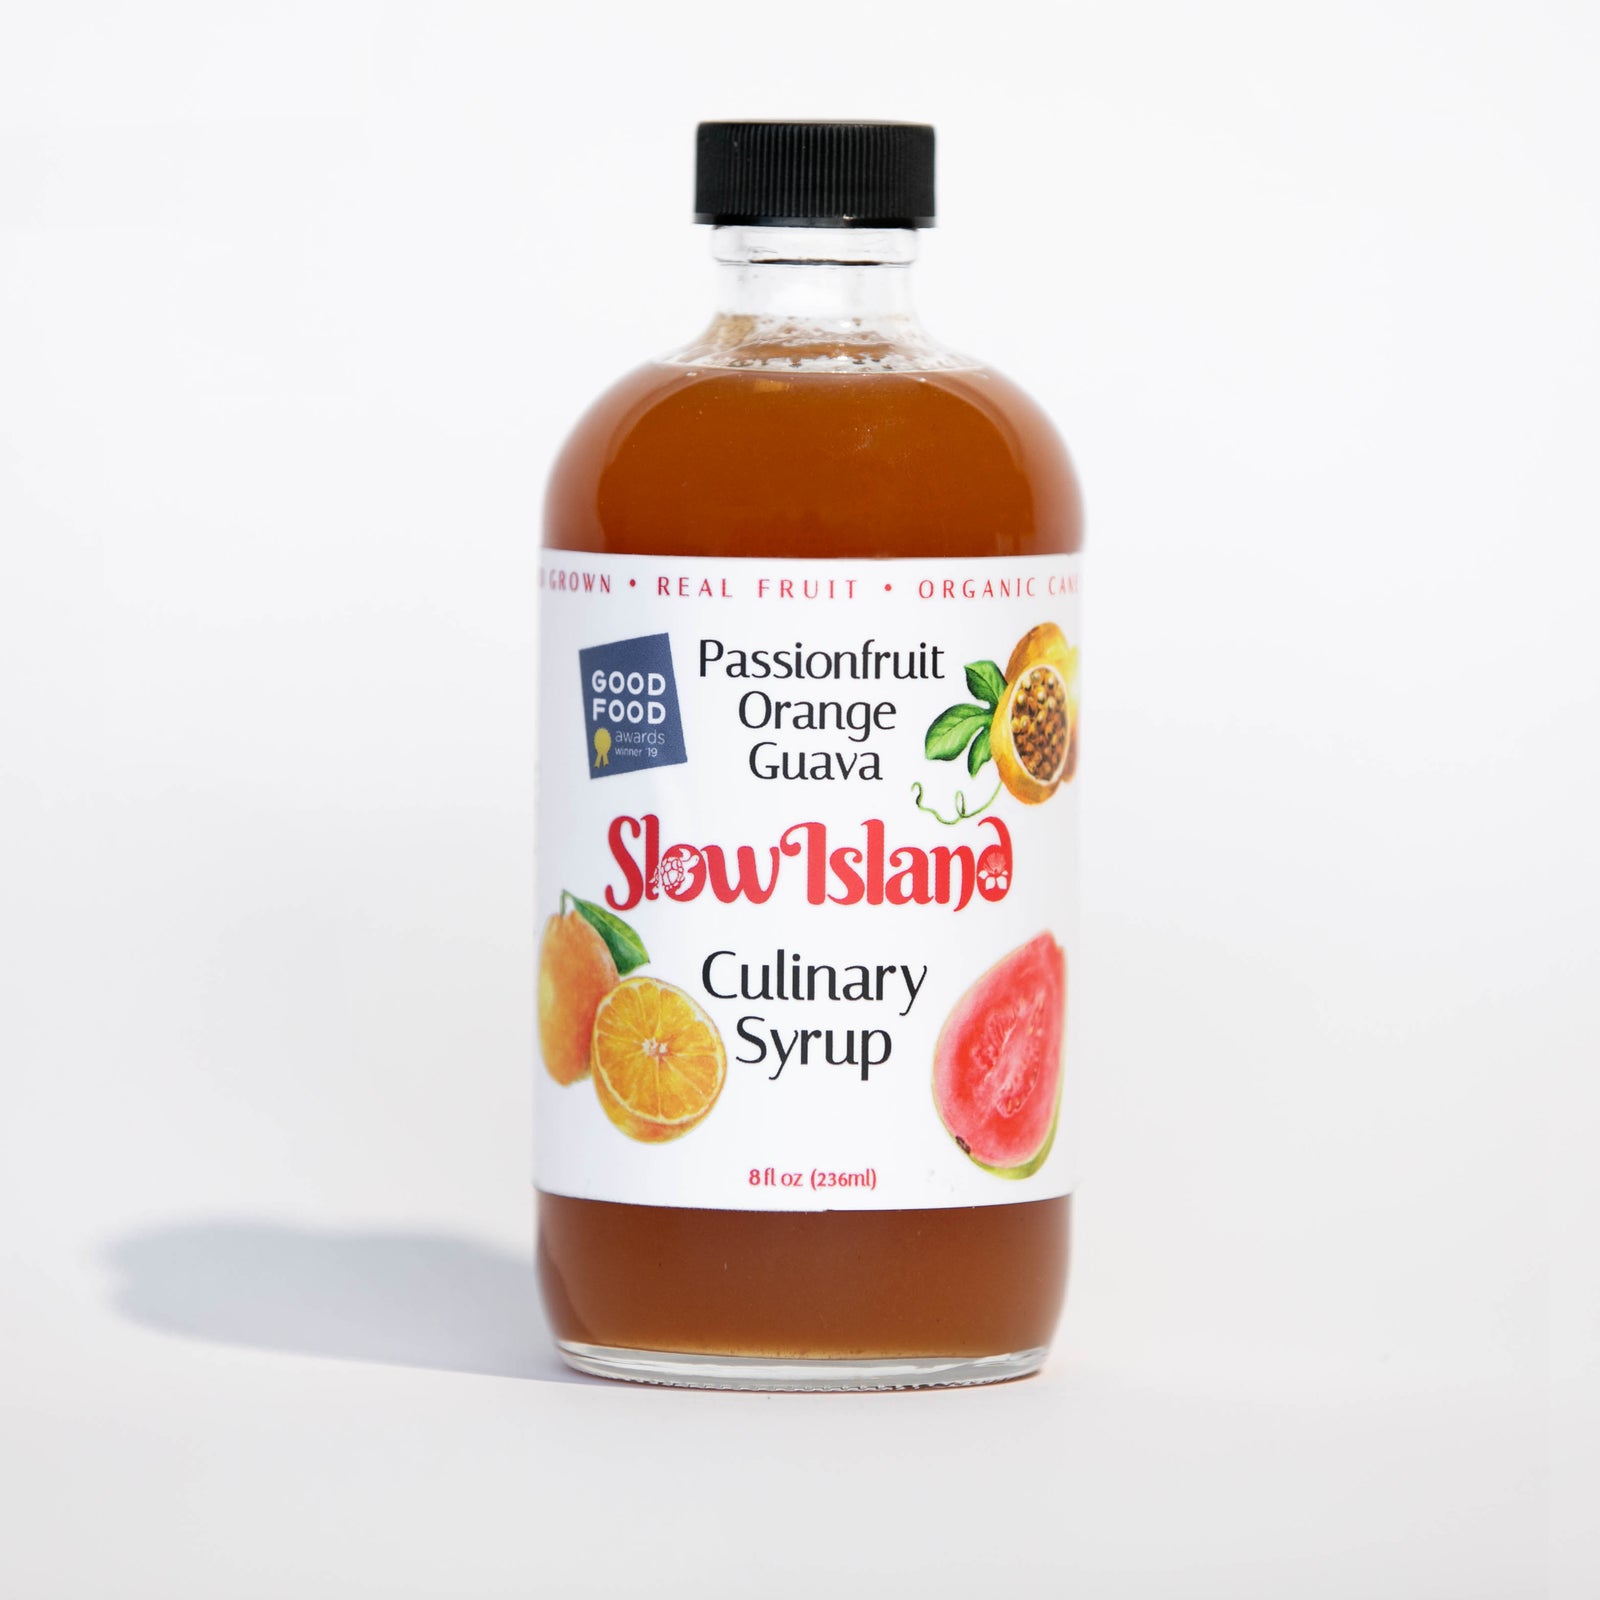 Passionfruit Orange Guava Culinary Syrup